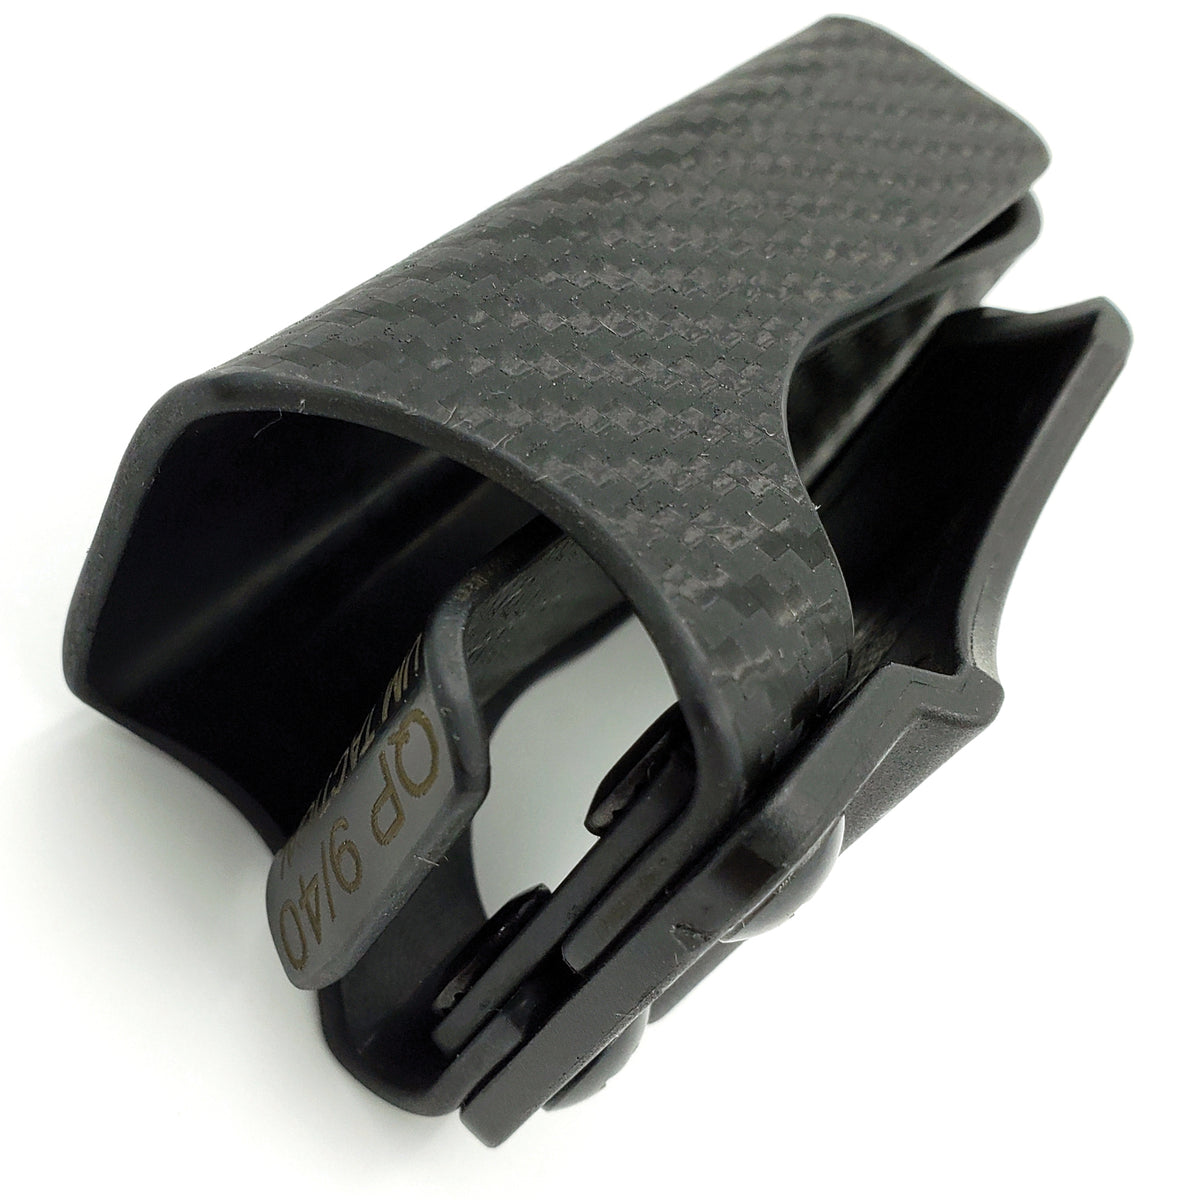 Ambidextrous Tactical IWB/OWB Magazine Holster Mag Carrier Fit 9mm/.40 Amberide 